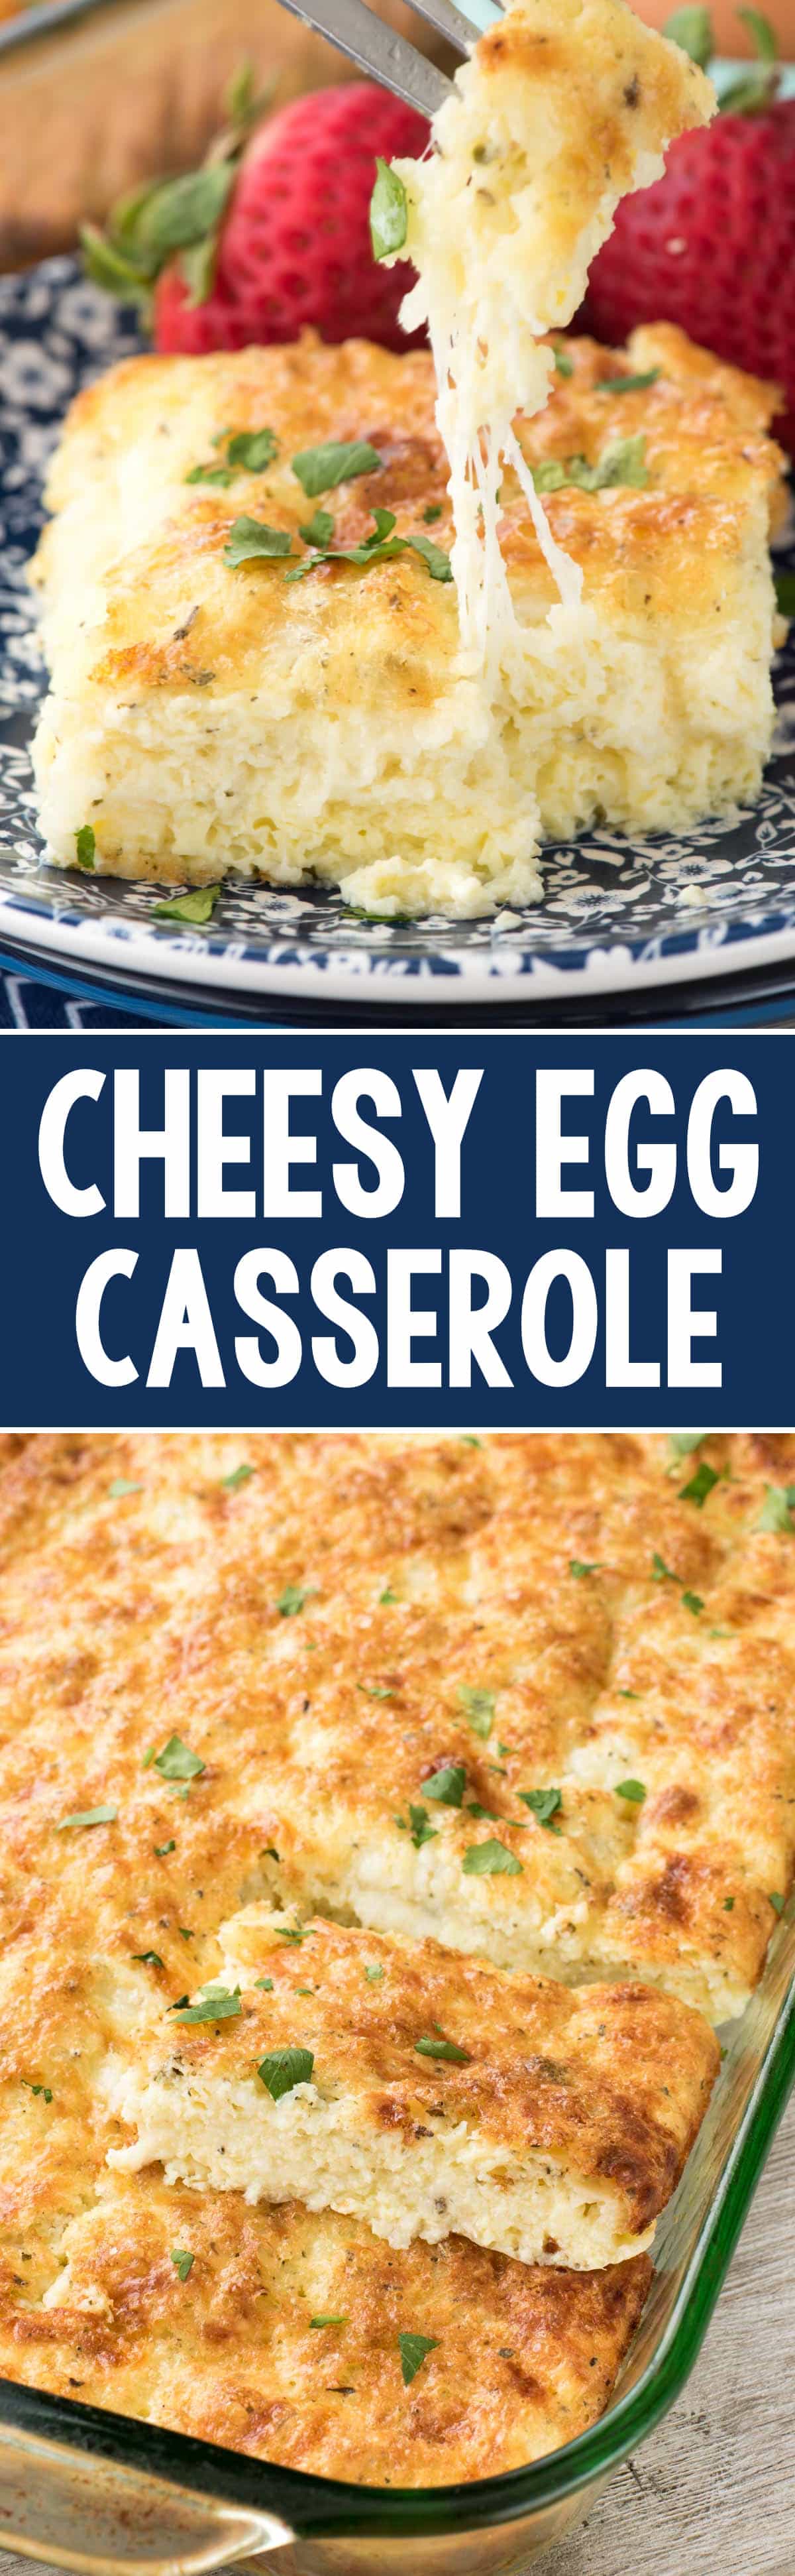 Buttery Cheesy Egg Casserole - this recipe is the perfect baked egg recipe for brunch! It's full of cheese and spices and everyone loves it.